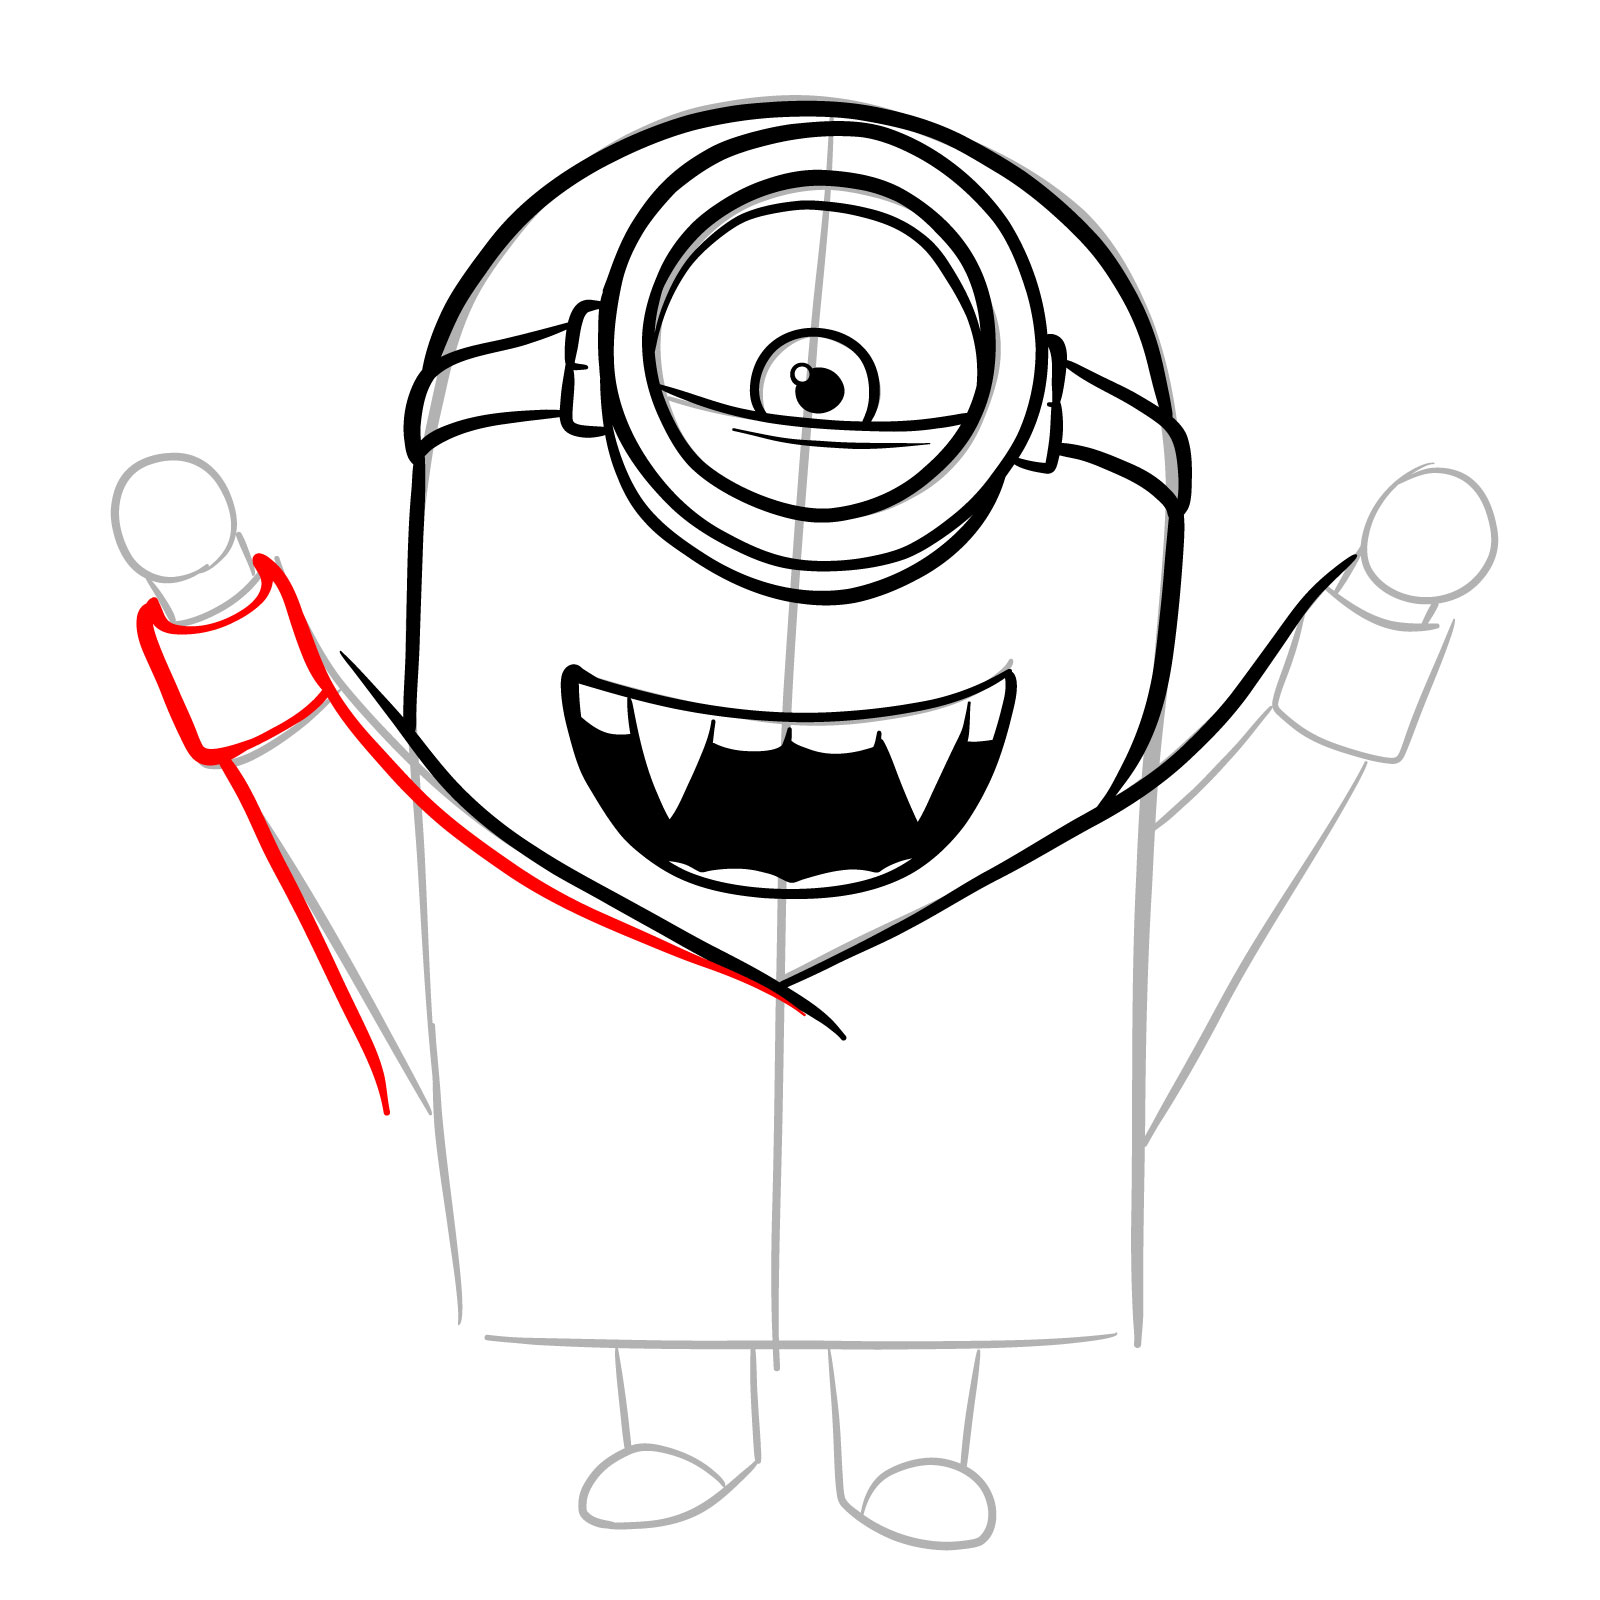 How to Draw a Vampire Minion - step 14